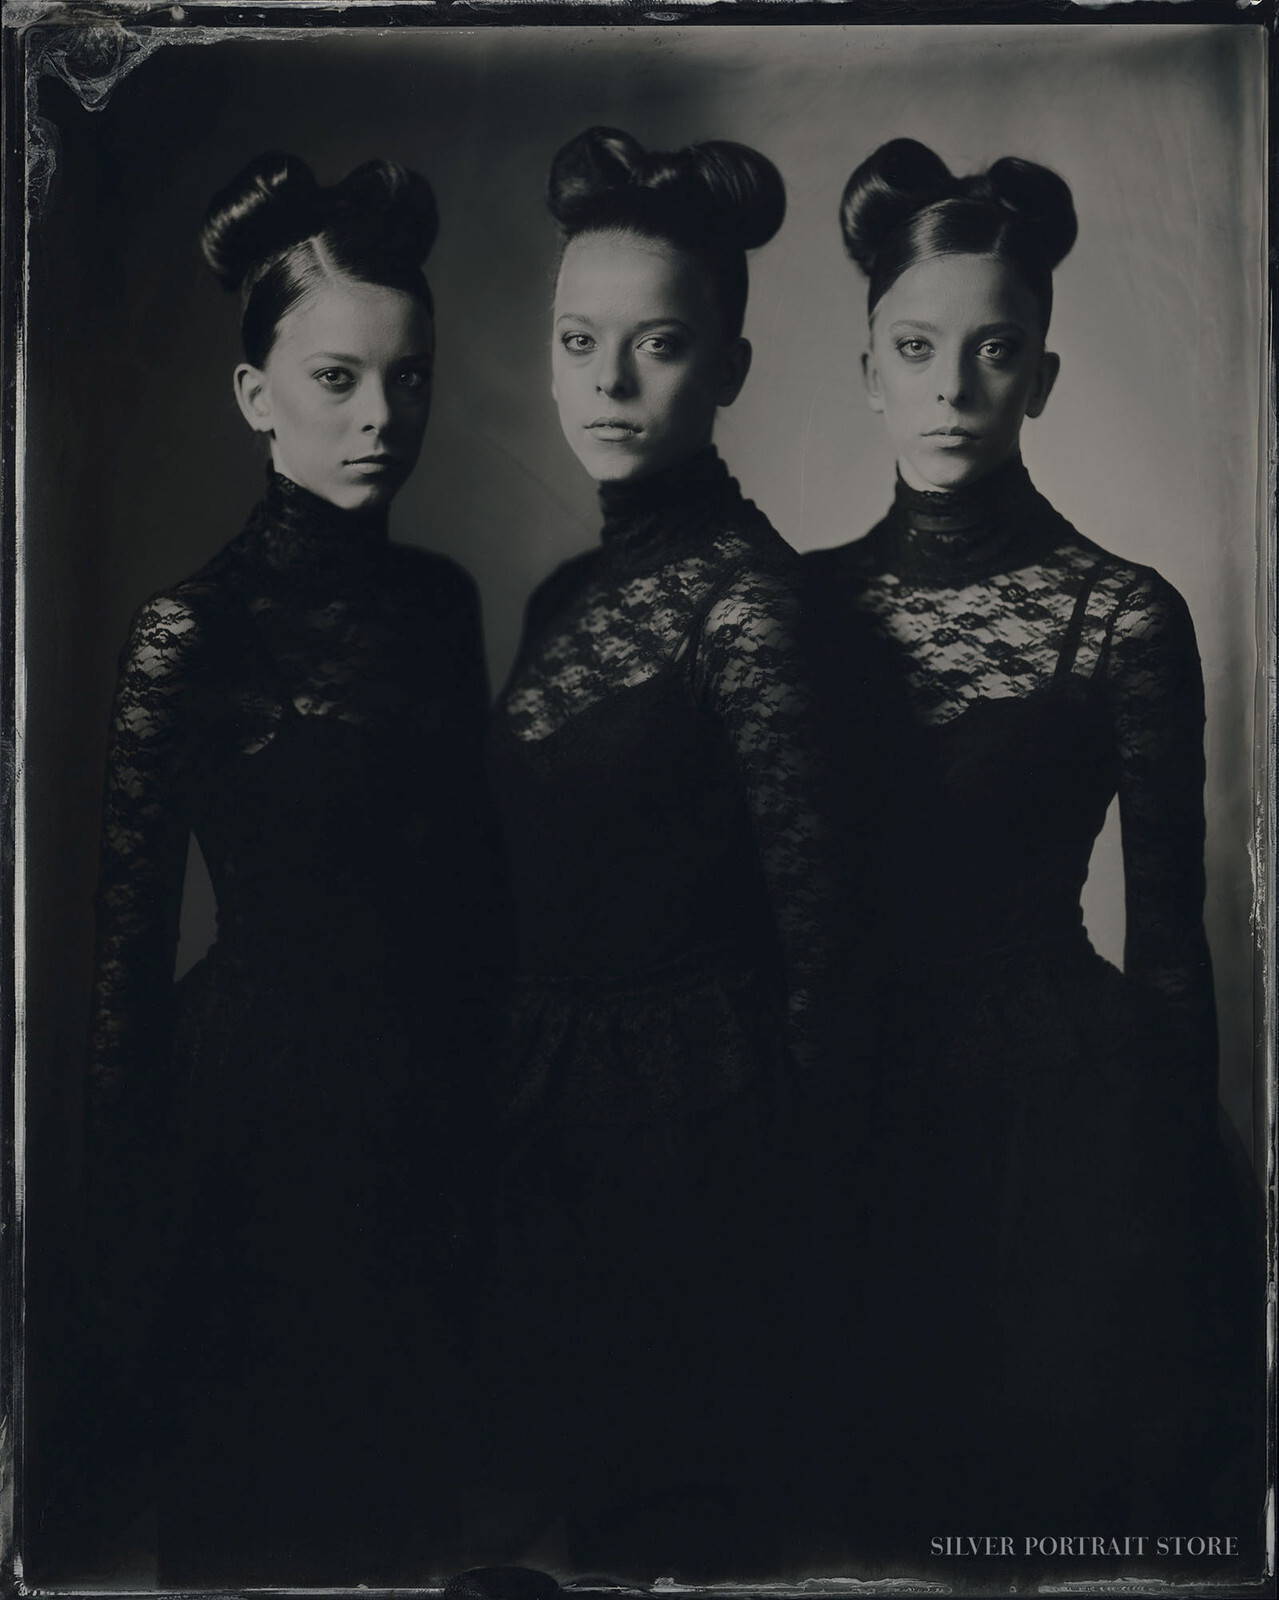 Ellis, Bo & Amy-Silver Portrait Store-Scan from Wet plate collodion-Tintype 20 x 25 cm